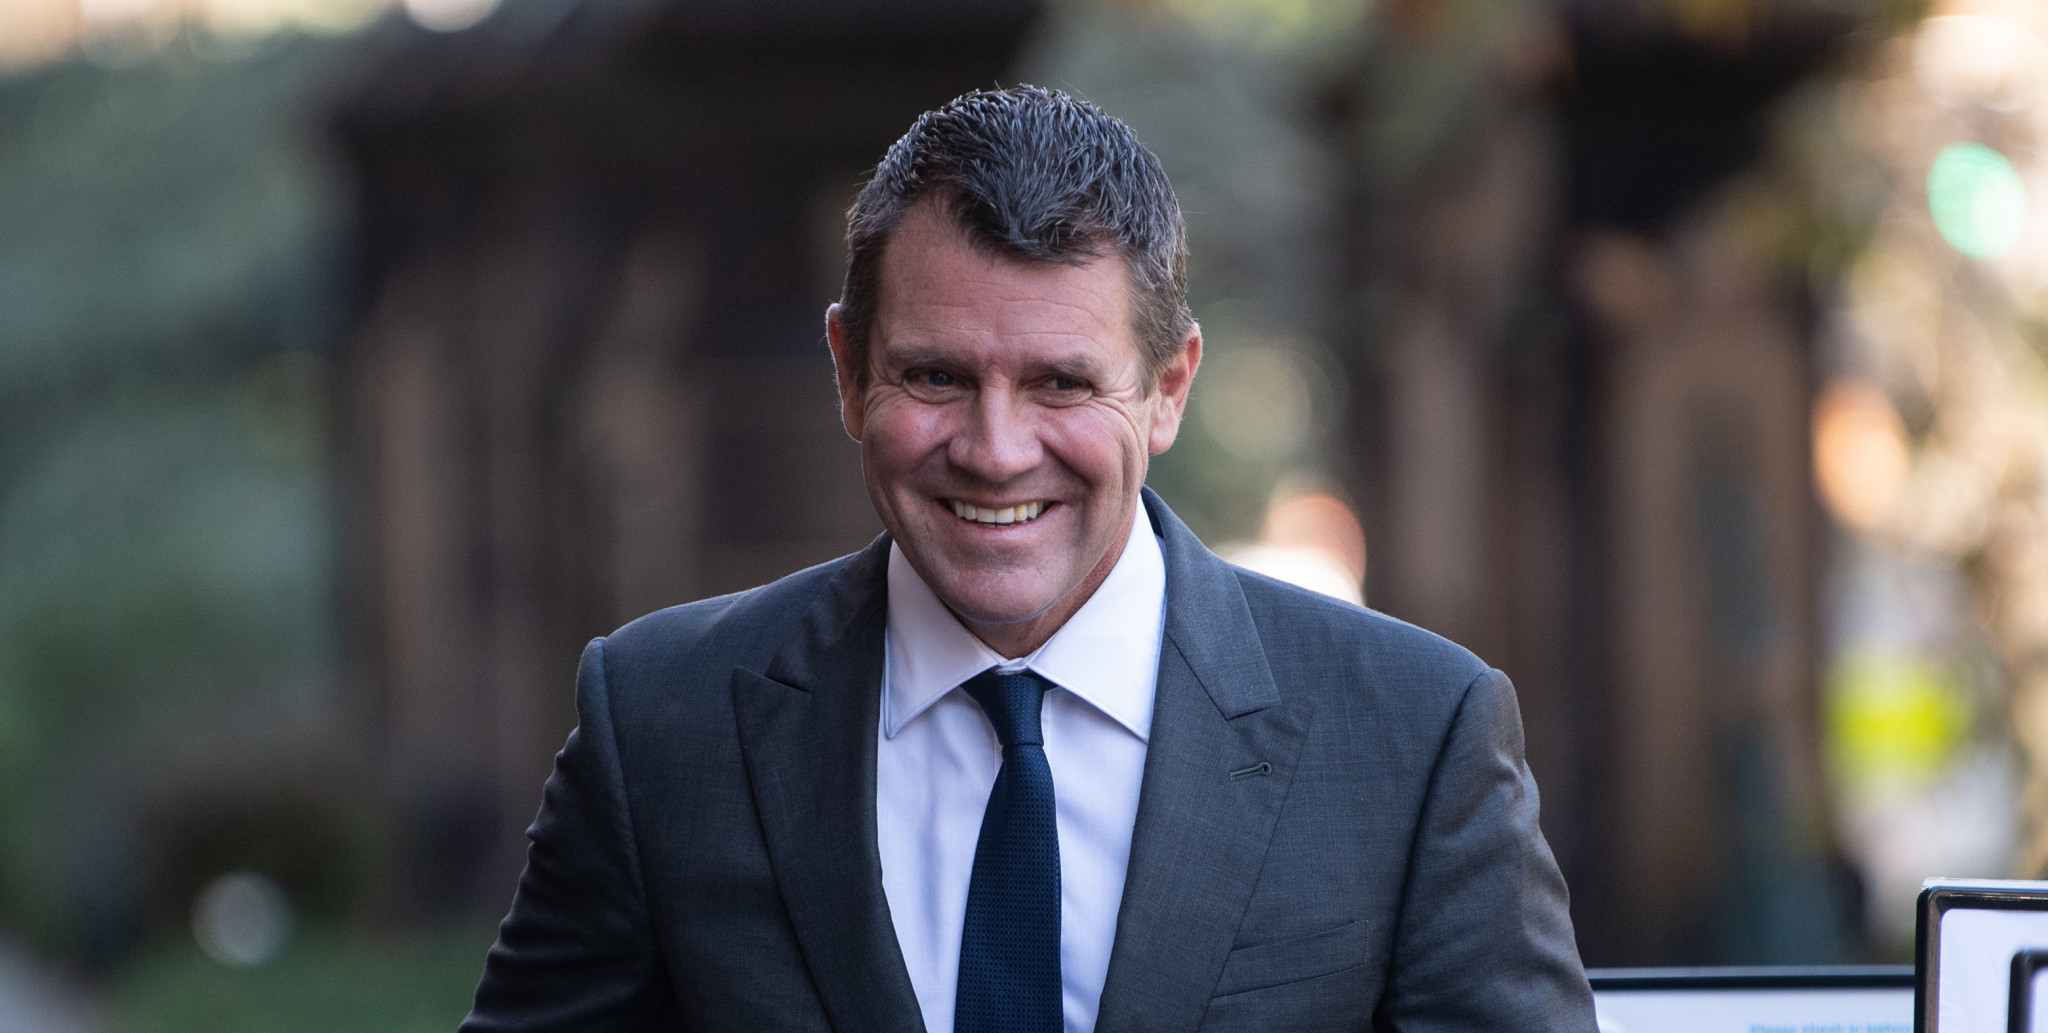 Ex-New South Wales Premier Baird to become Cricket Australia chair